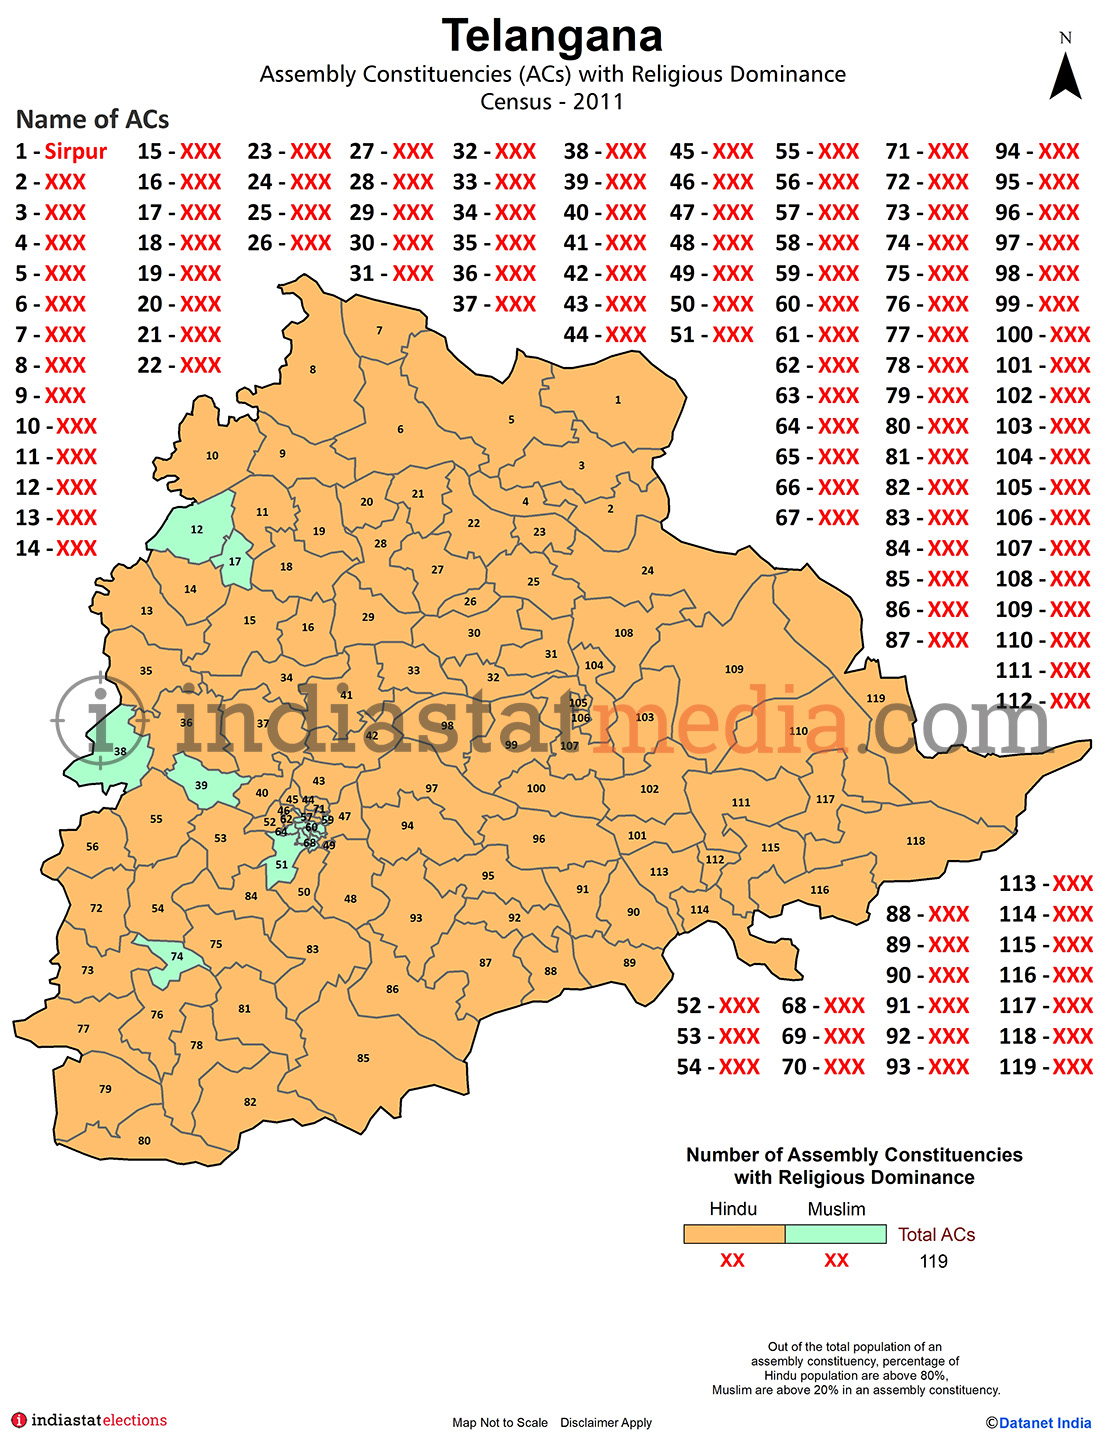 Assembly Constituencies (ACs) with Religious Dominance in Telangana- Census 2011